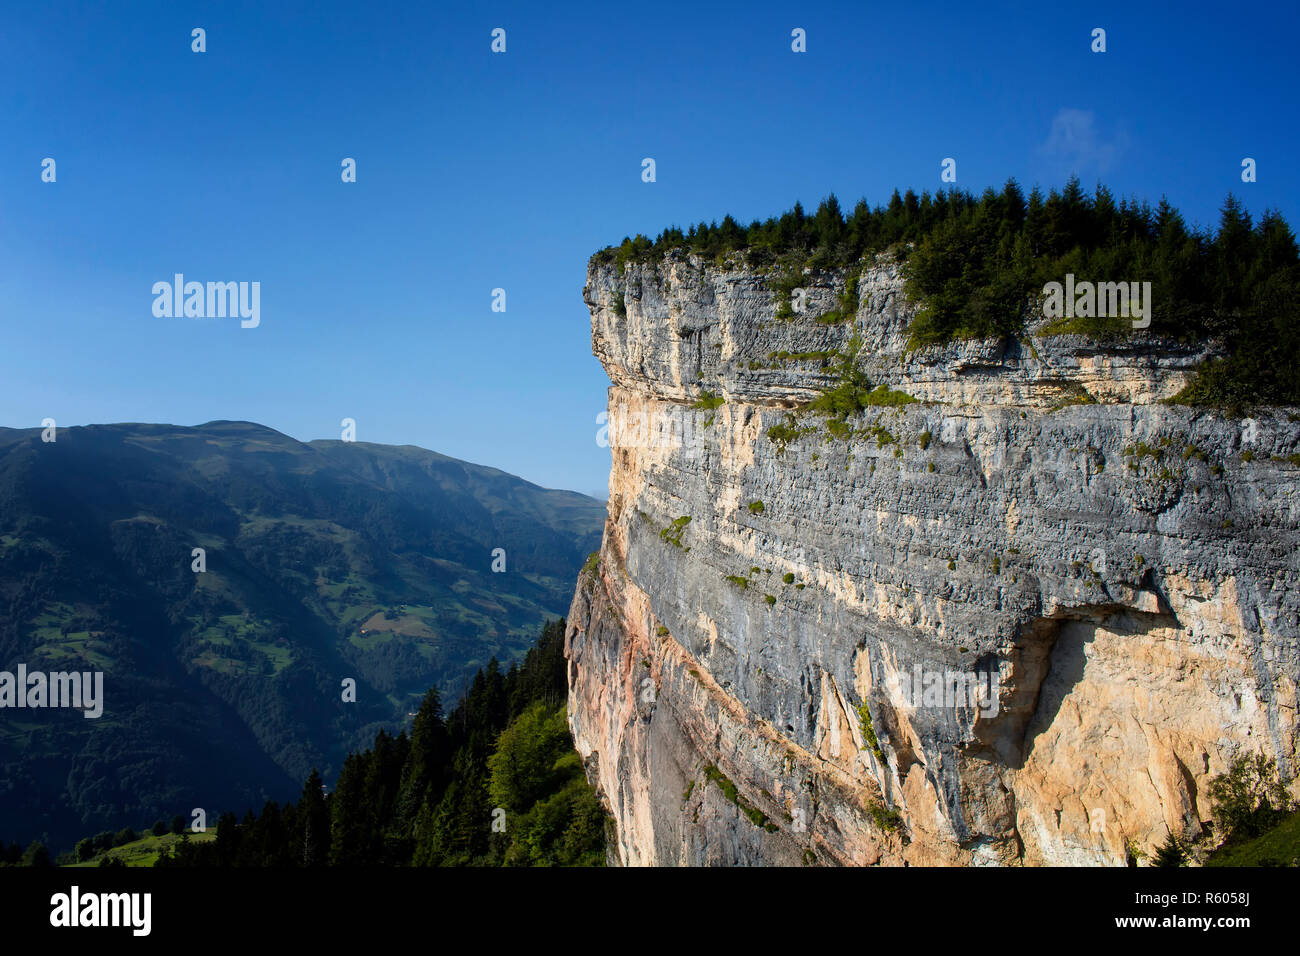 View of a big rock on top of a mountain, valley, trees and beautiful nature. The image is captured in Trabzon/Rize area of Black Sea region located at Stock Photo